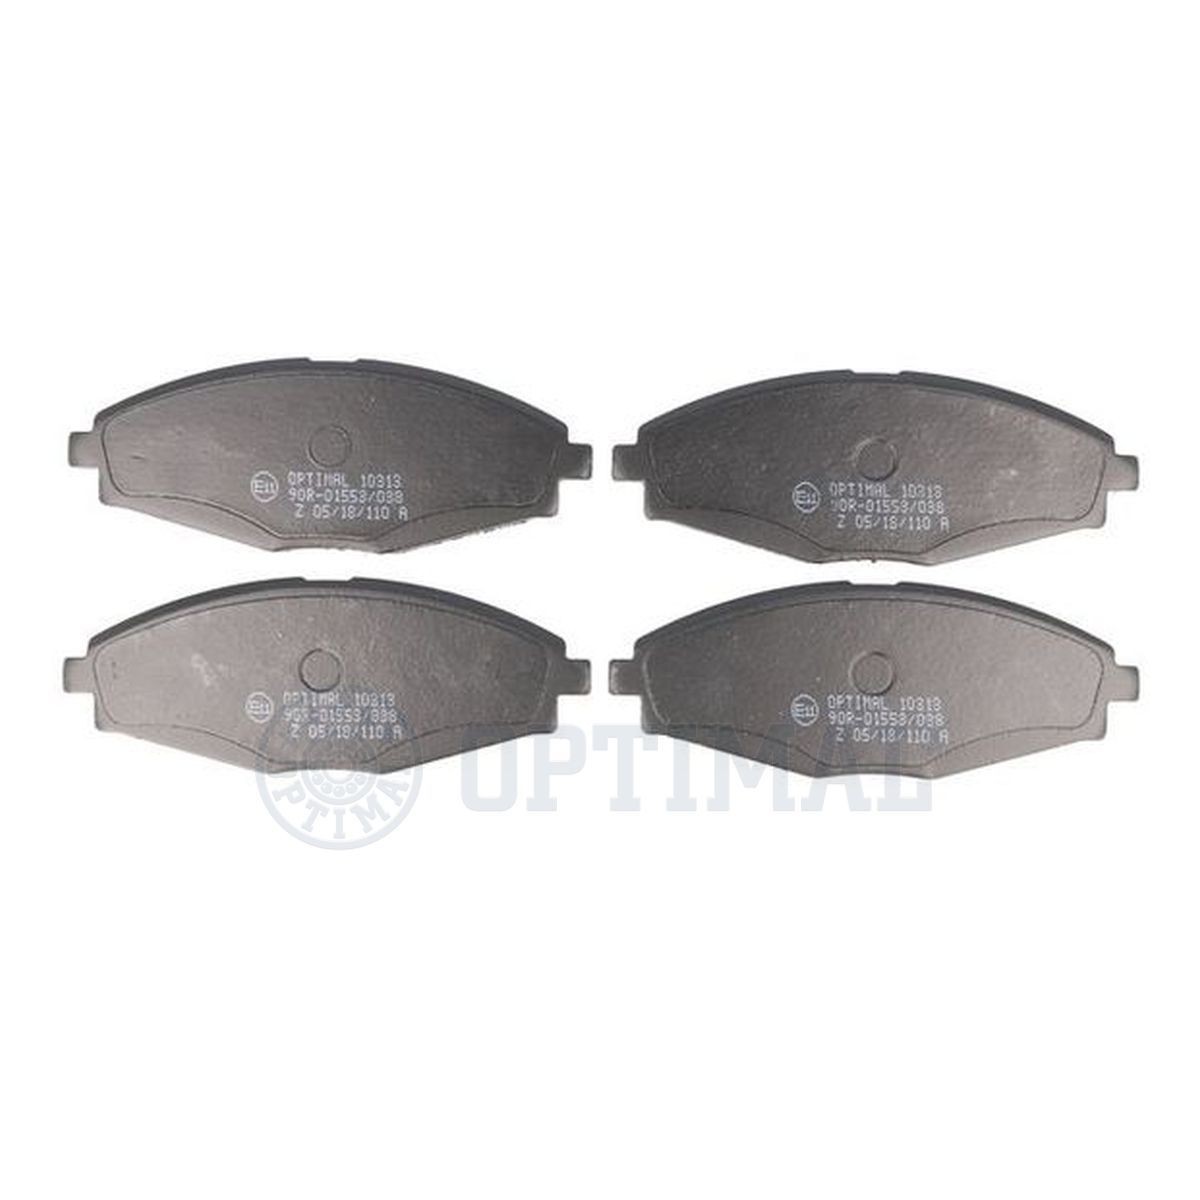 OPTIMAL 10313 Brake pad set Front Axle, not prepared for wear indicator